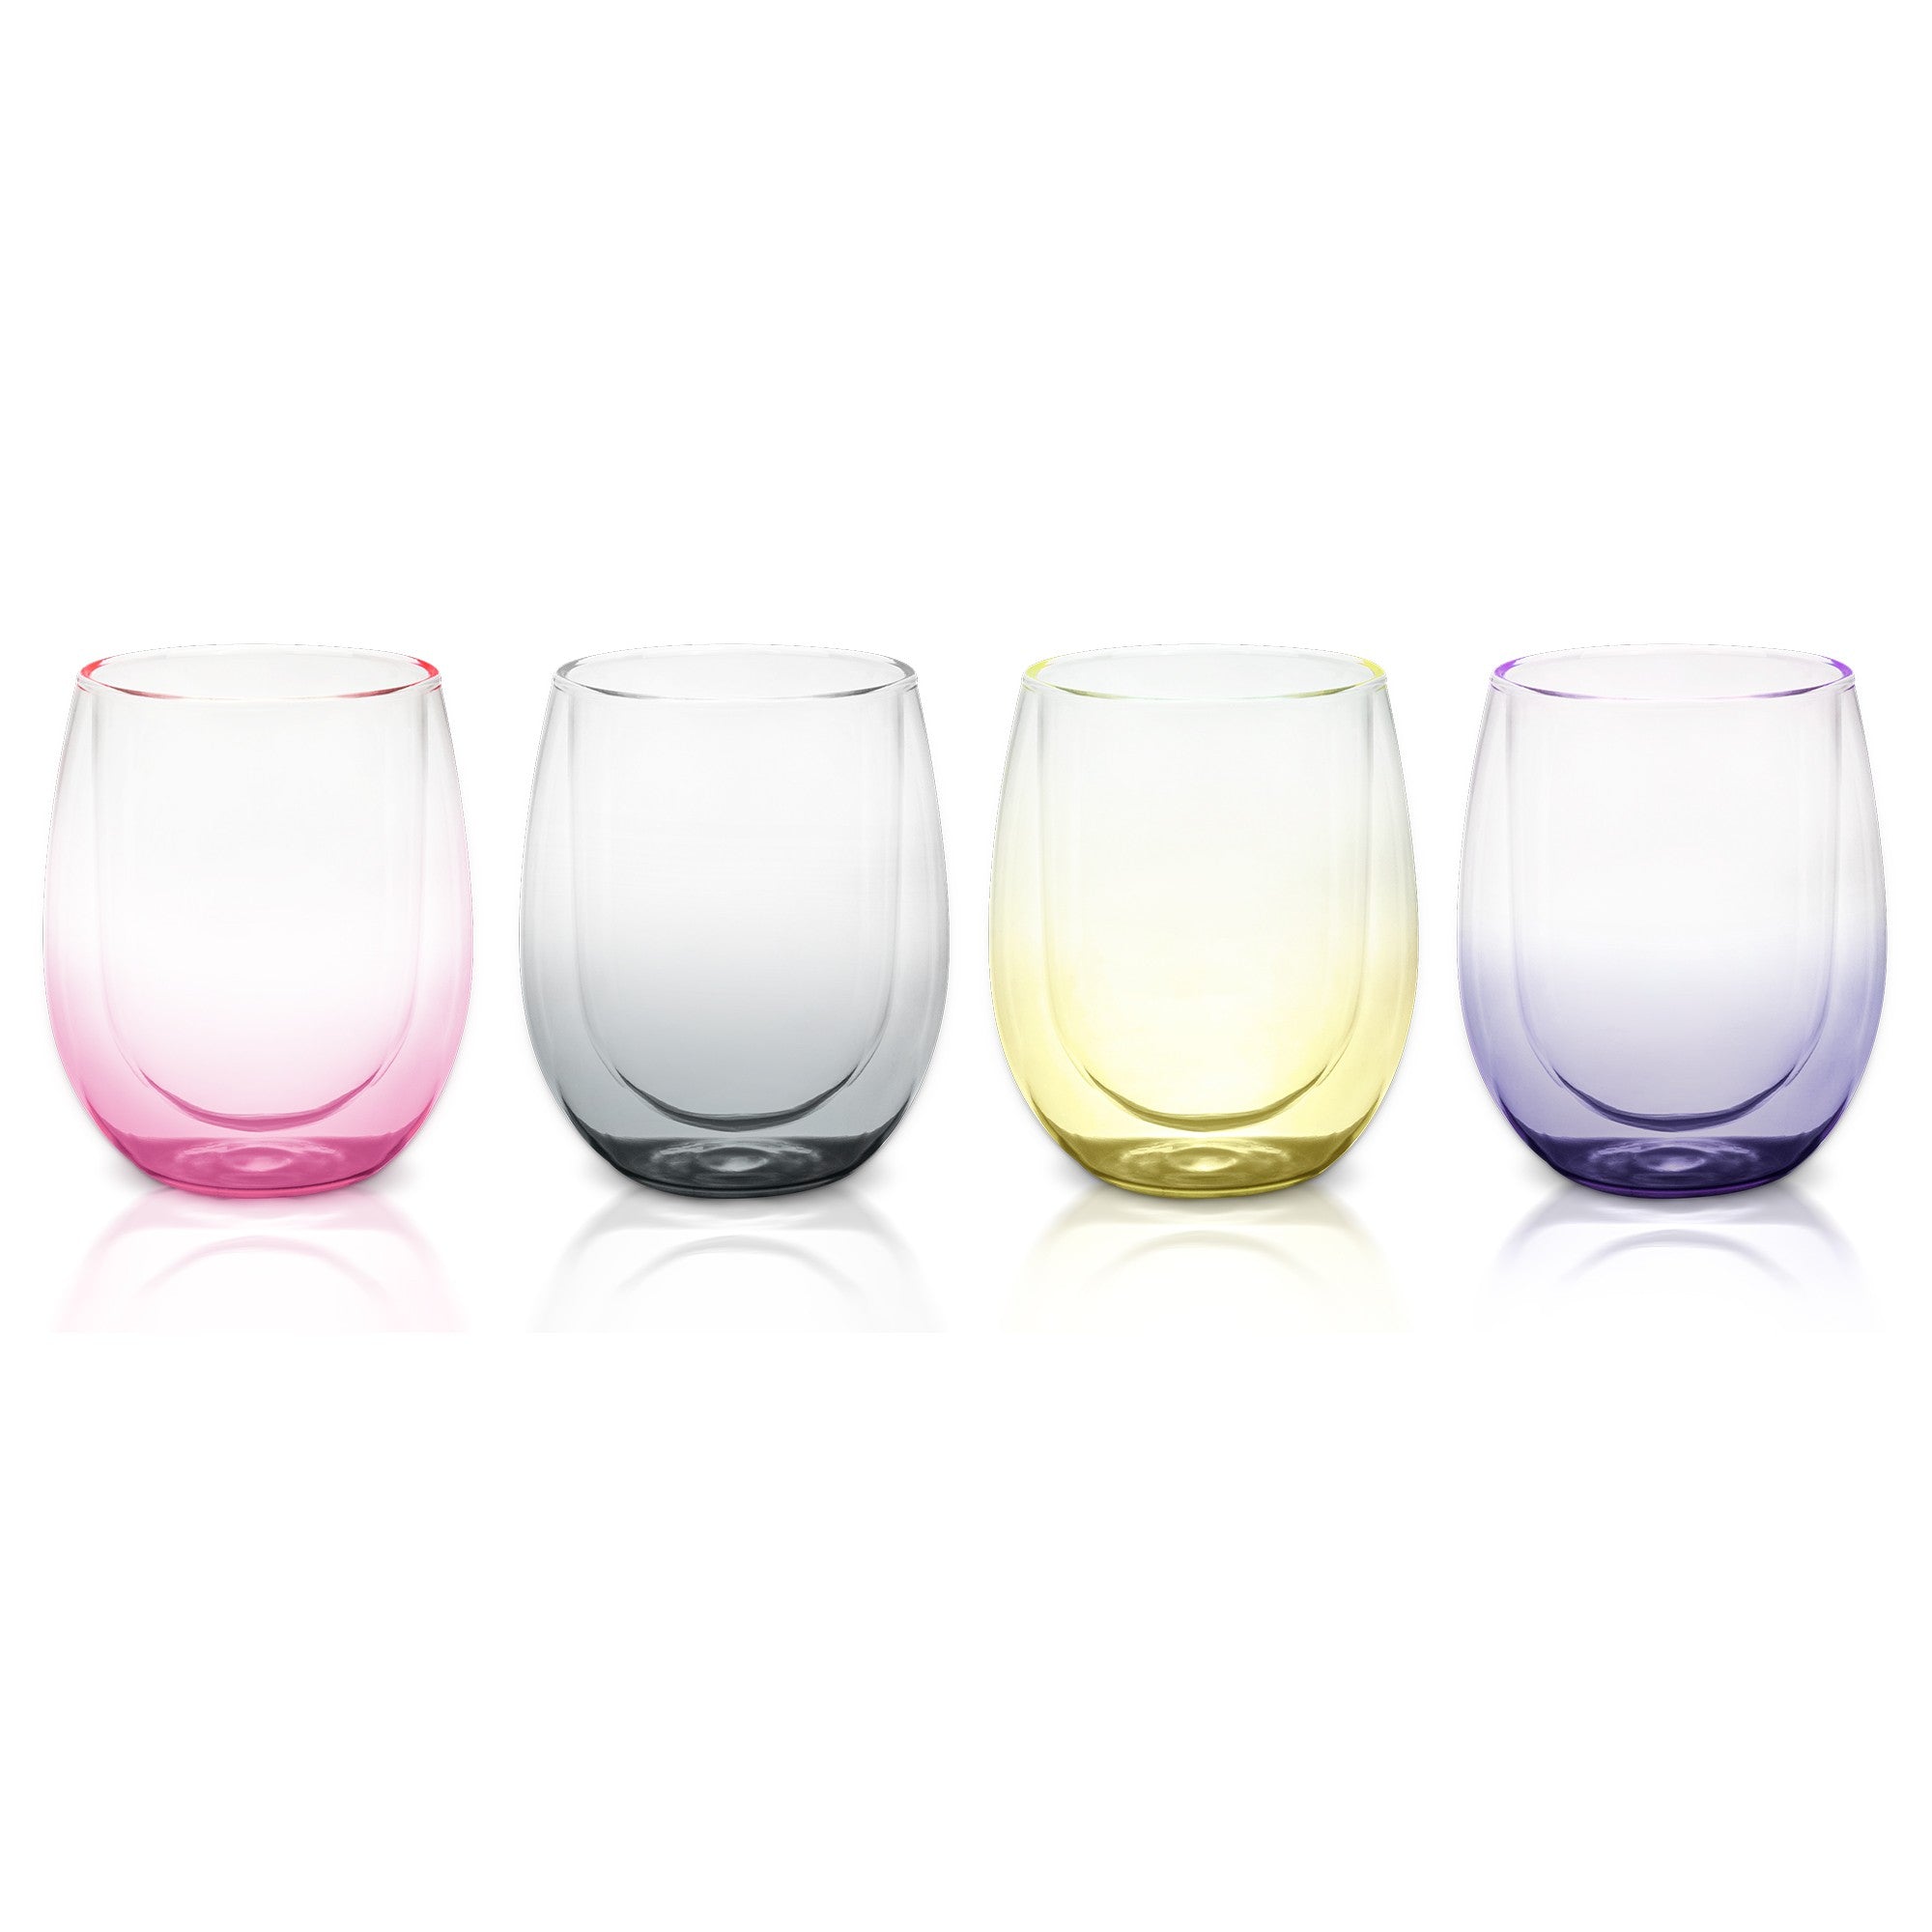 title:Safdie & Co. Bloom Double Wall Tumbler 4PC Assorted Colours 350ML;color:Multi